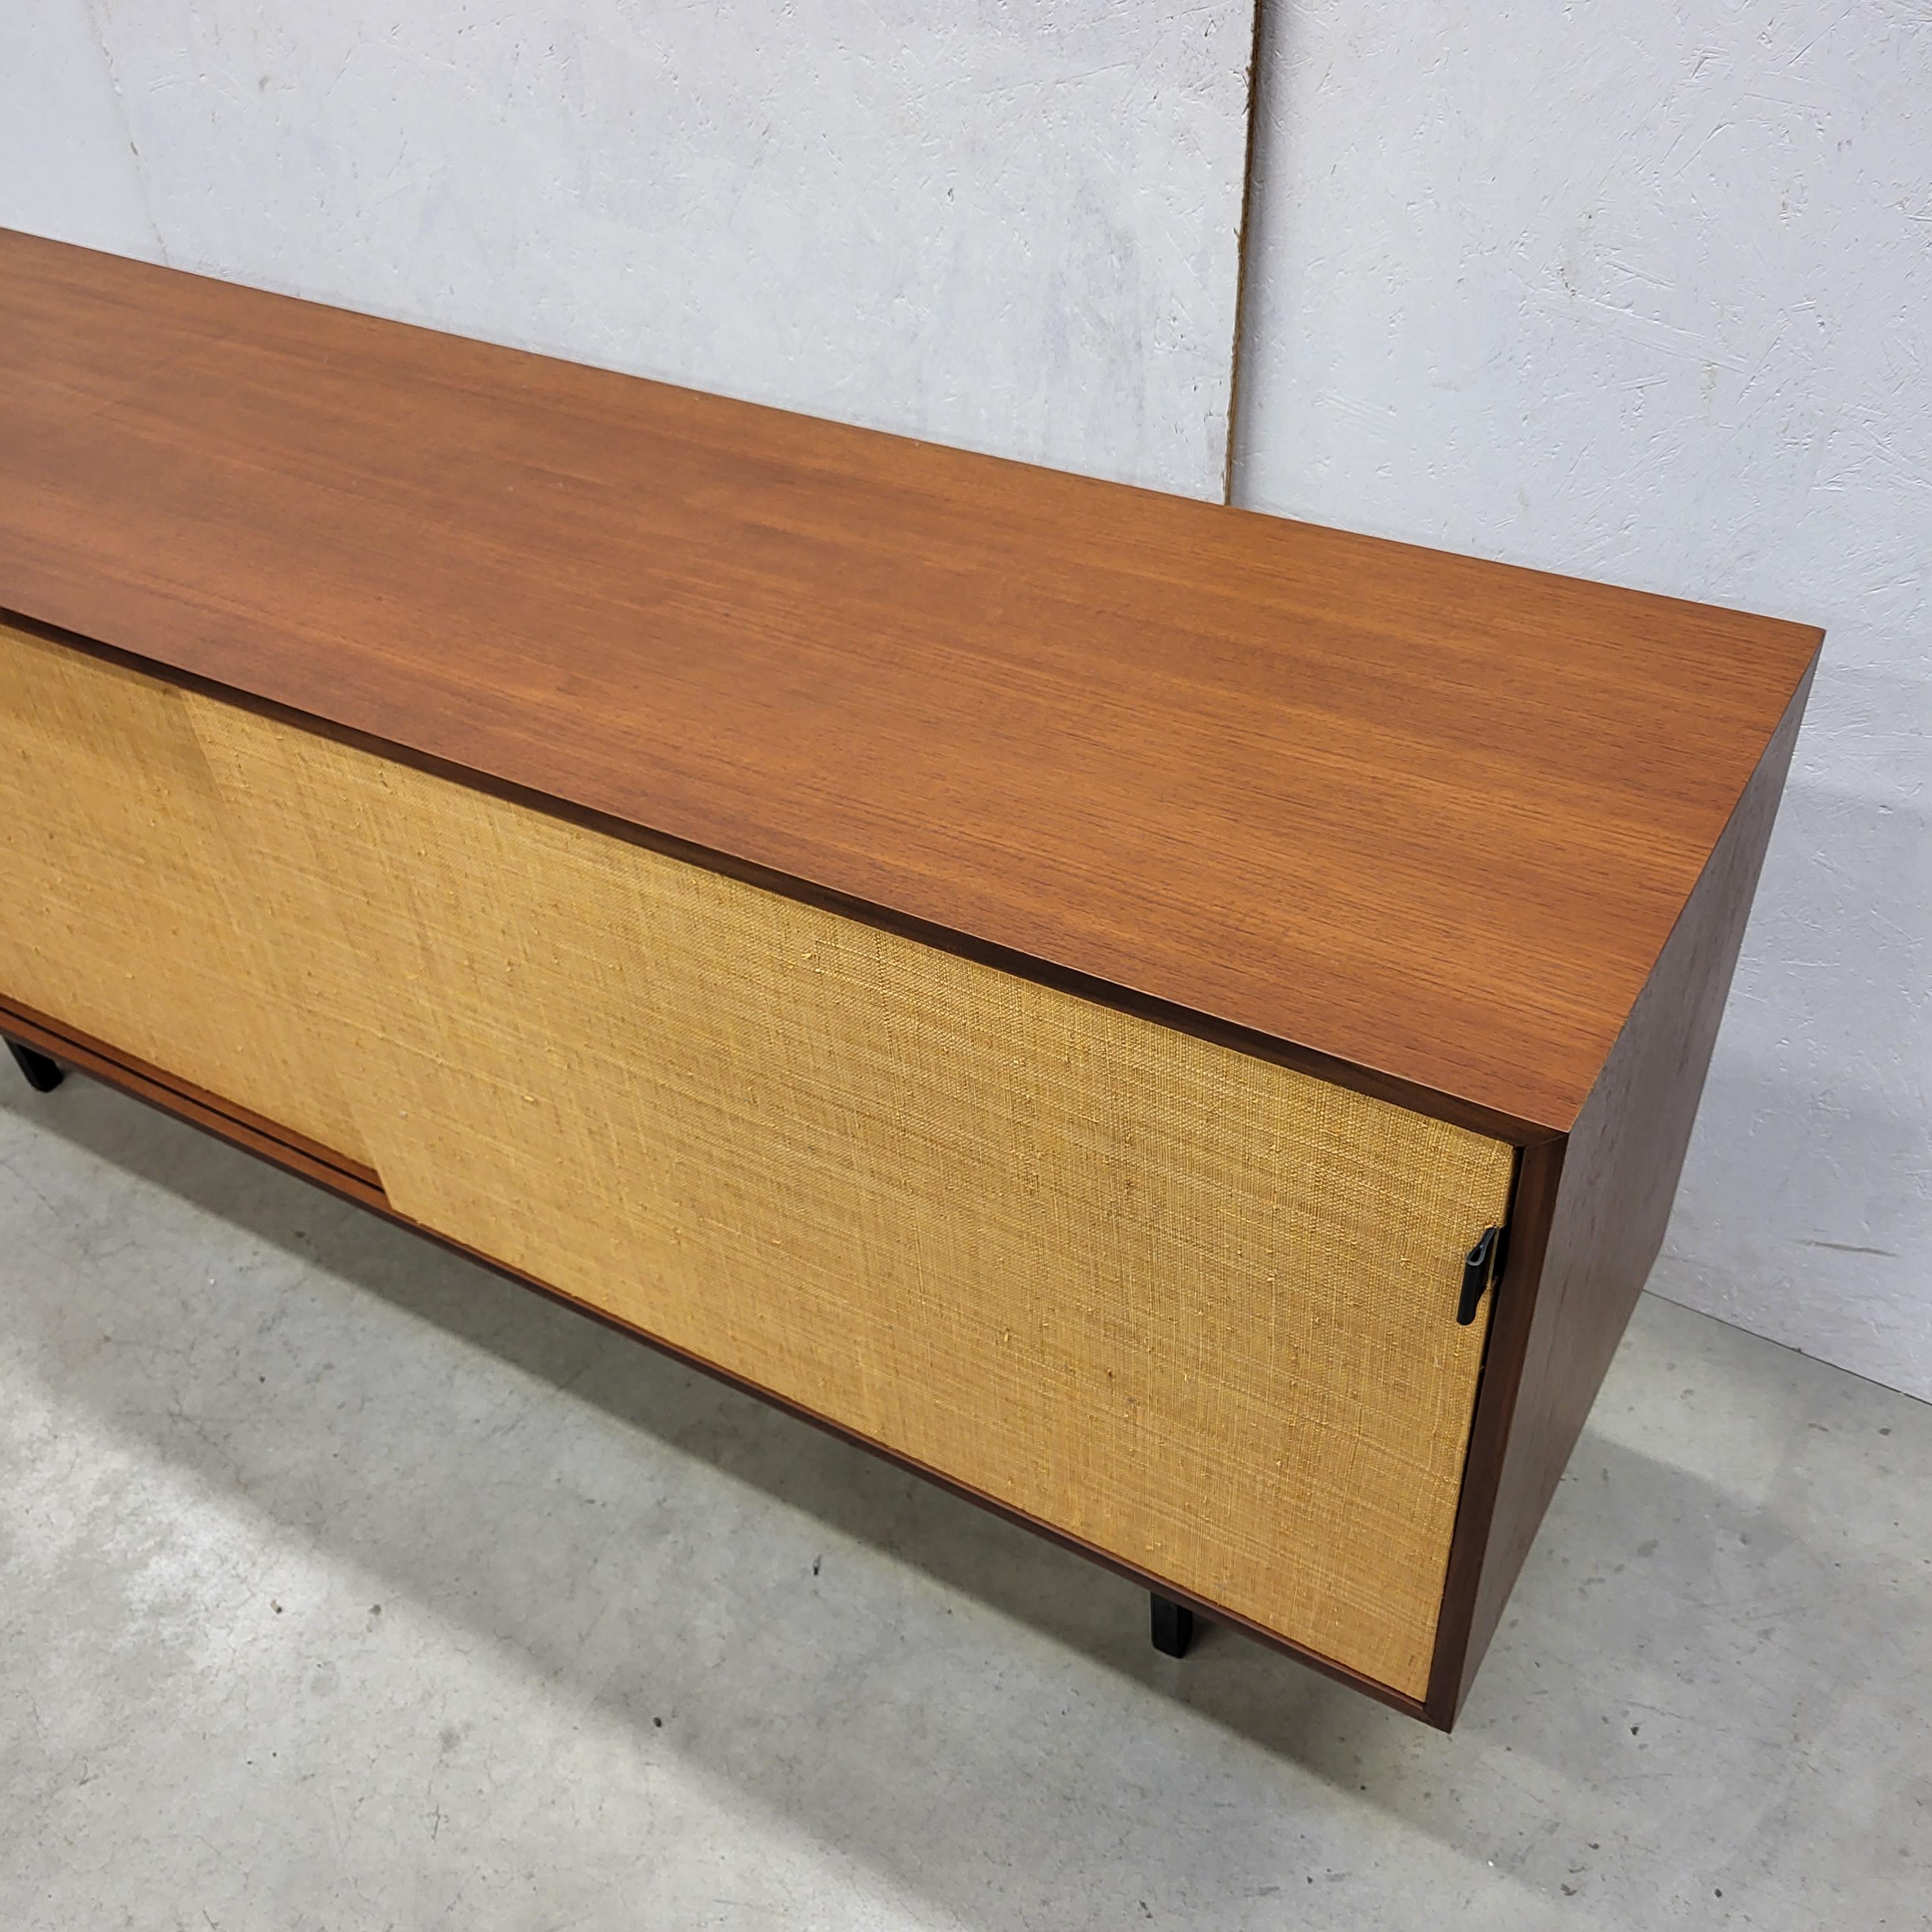 Florence Knoll Sideboard aus Seegras, Modell 116 von Knoll, 1952 (Holz) im Angebot